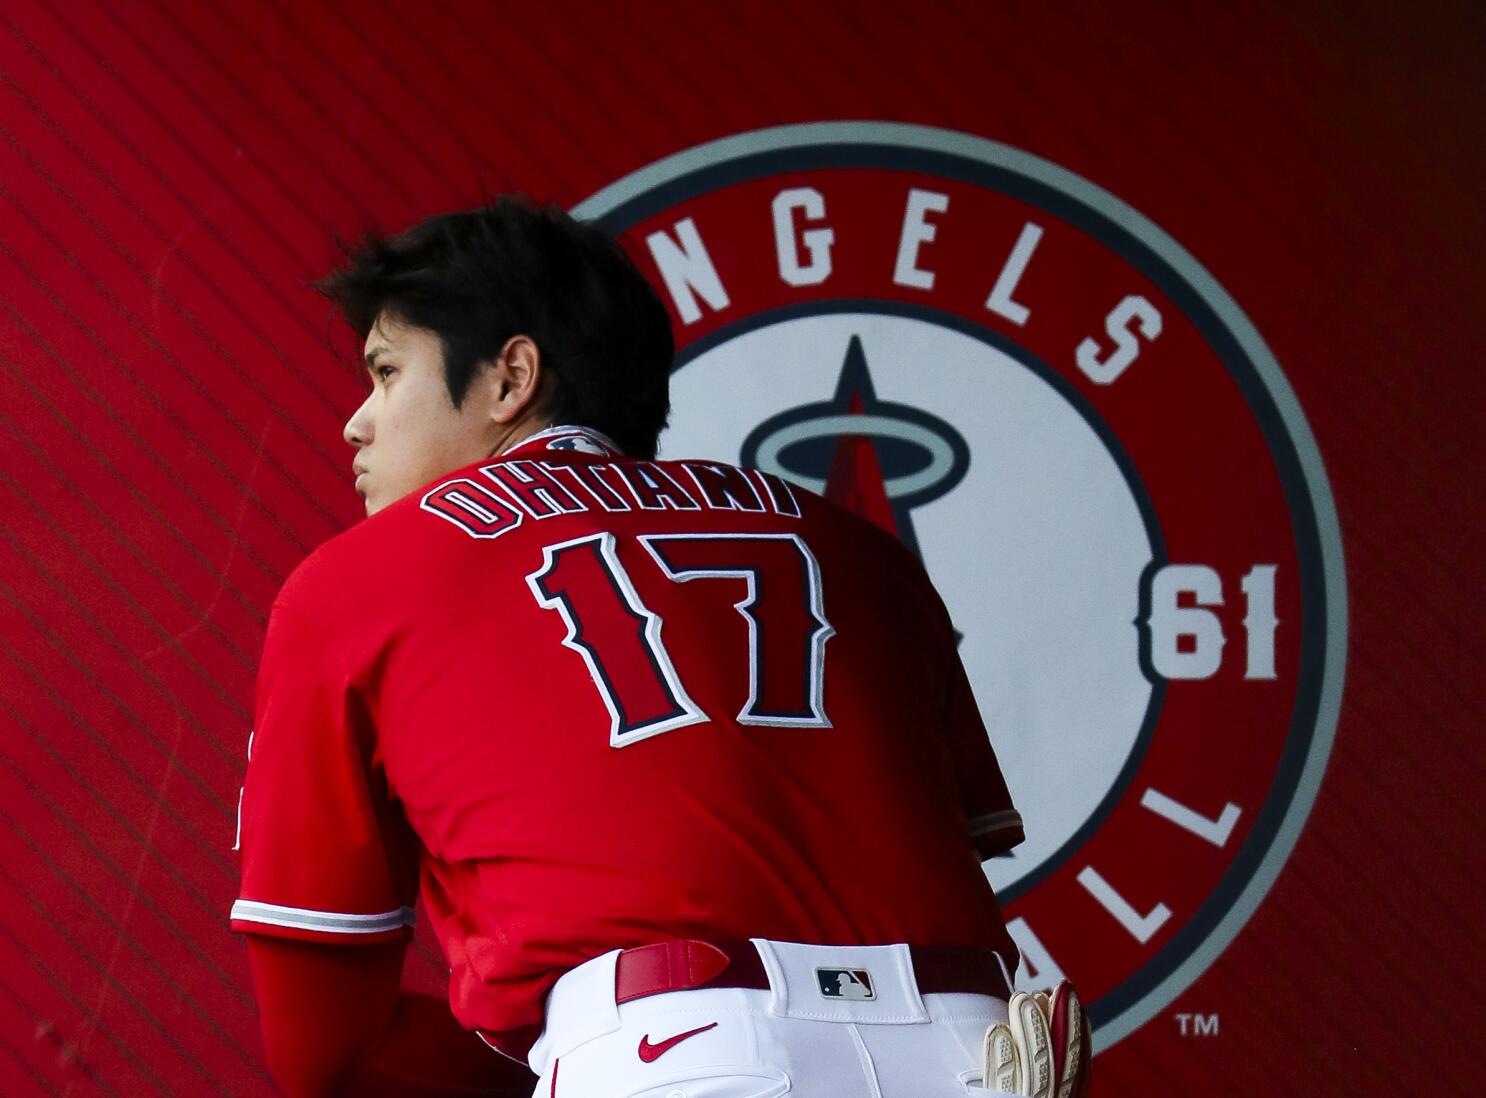 Shohei Ohtani's future is still uncertain as the Angels ponder a